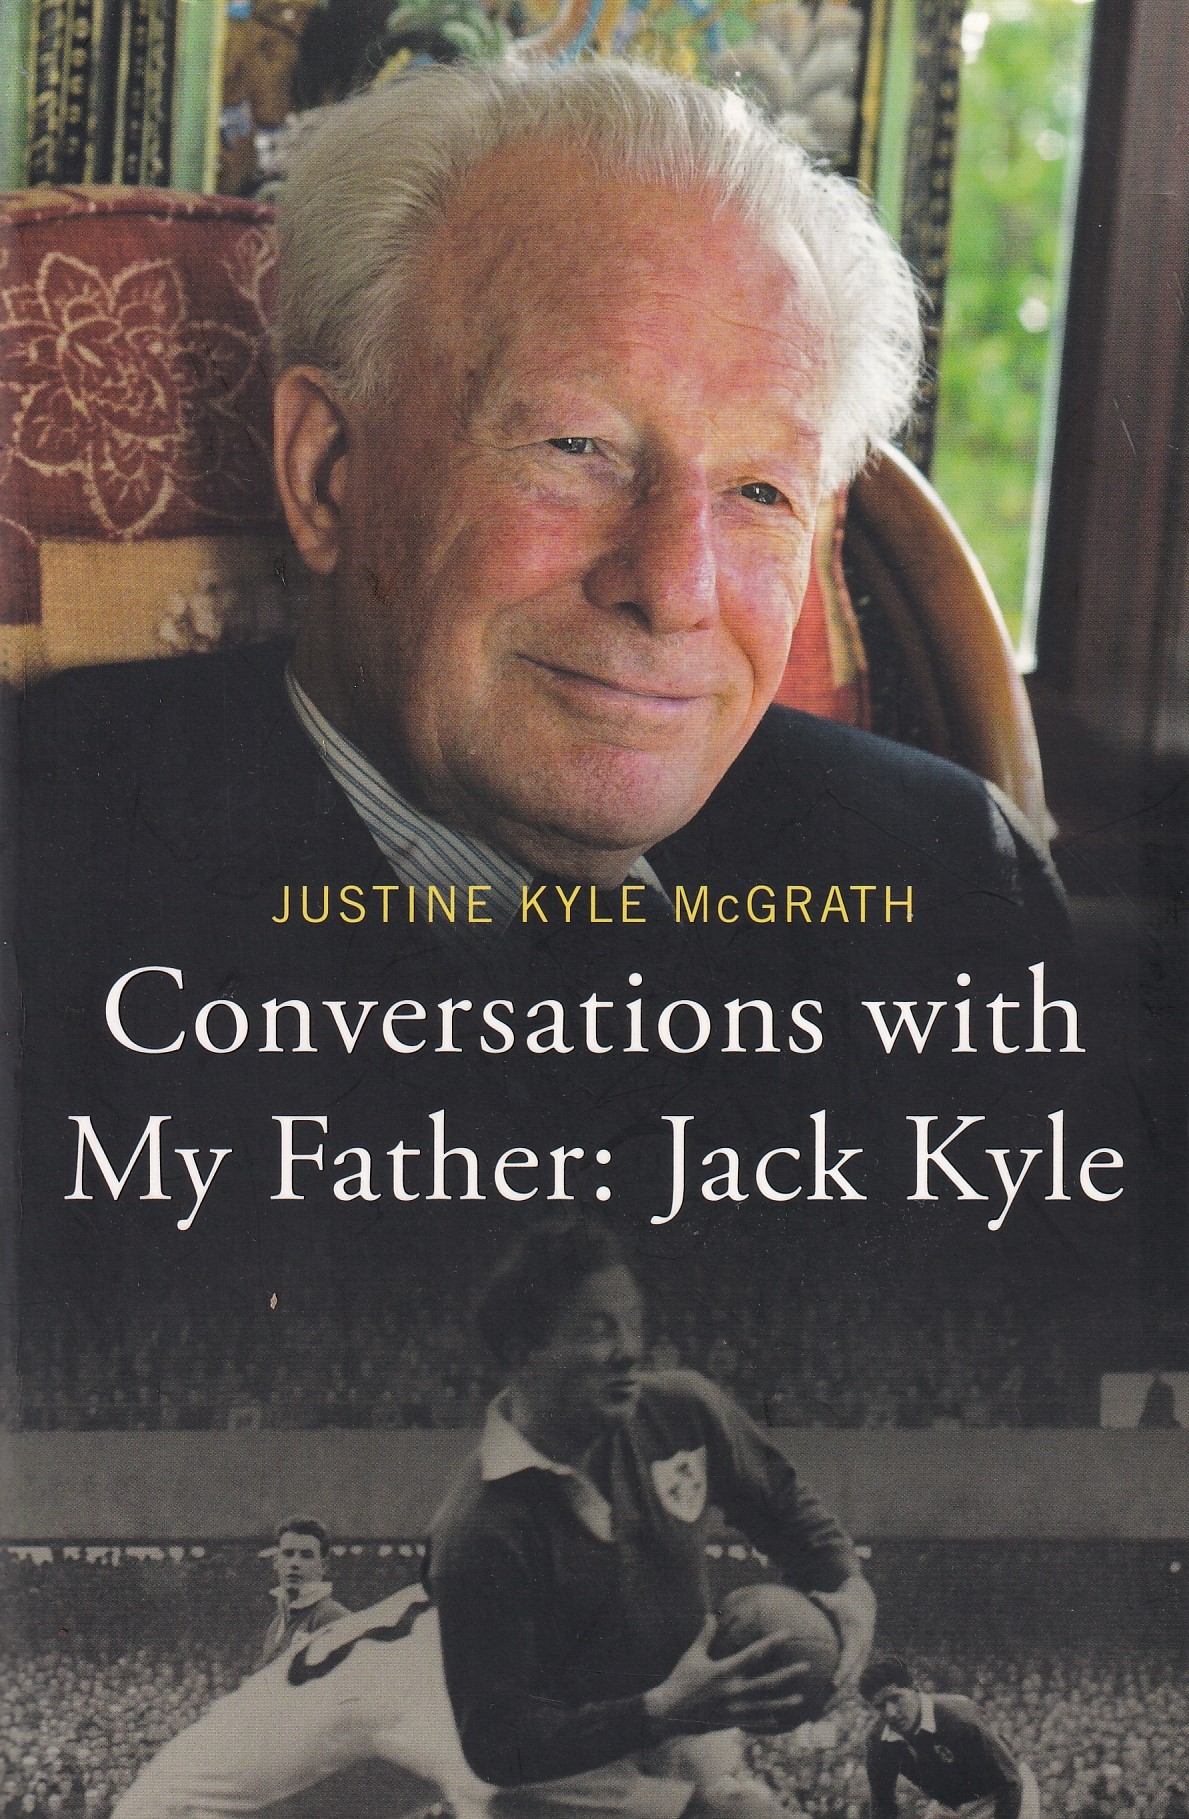 Conversations with My Father: Jack Kyle | Justine Kyle McGrath | Charlie Byrne's